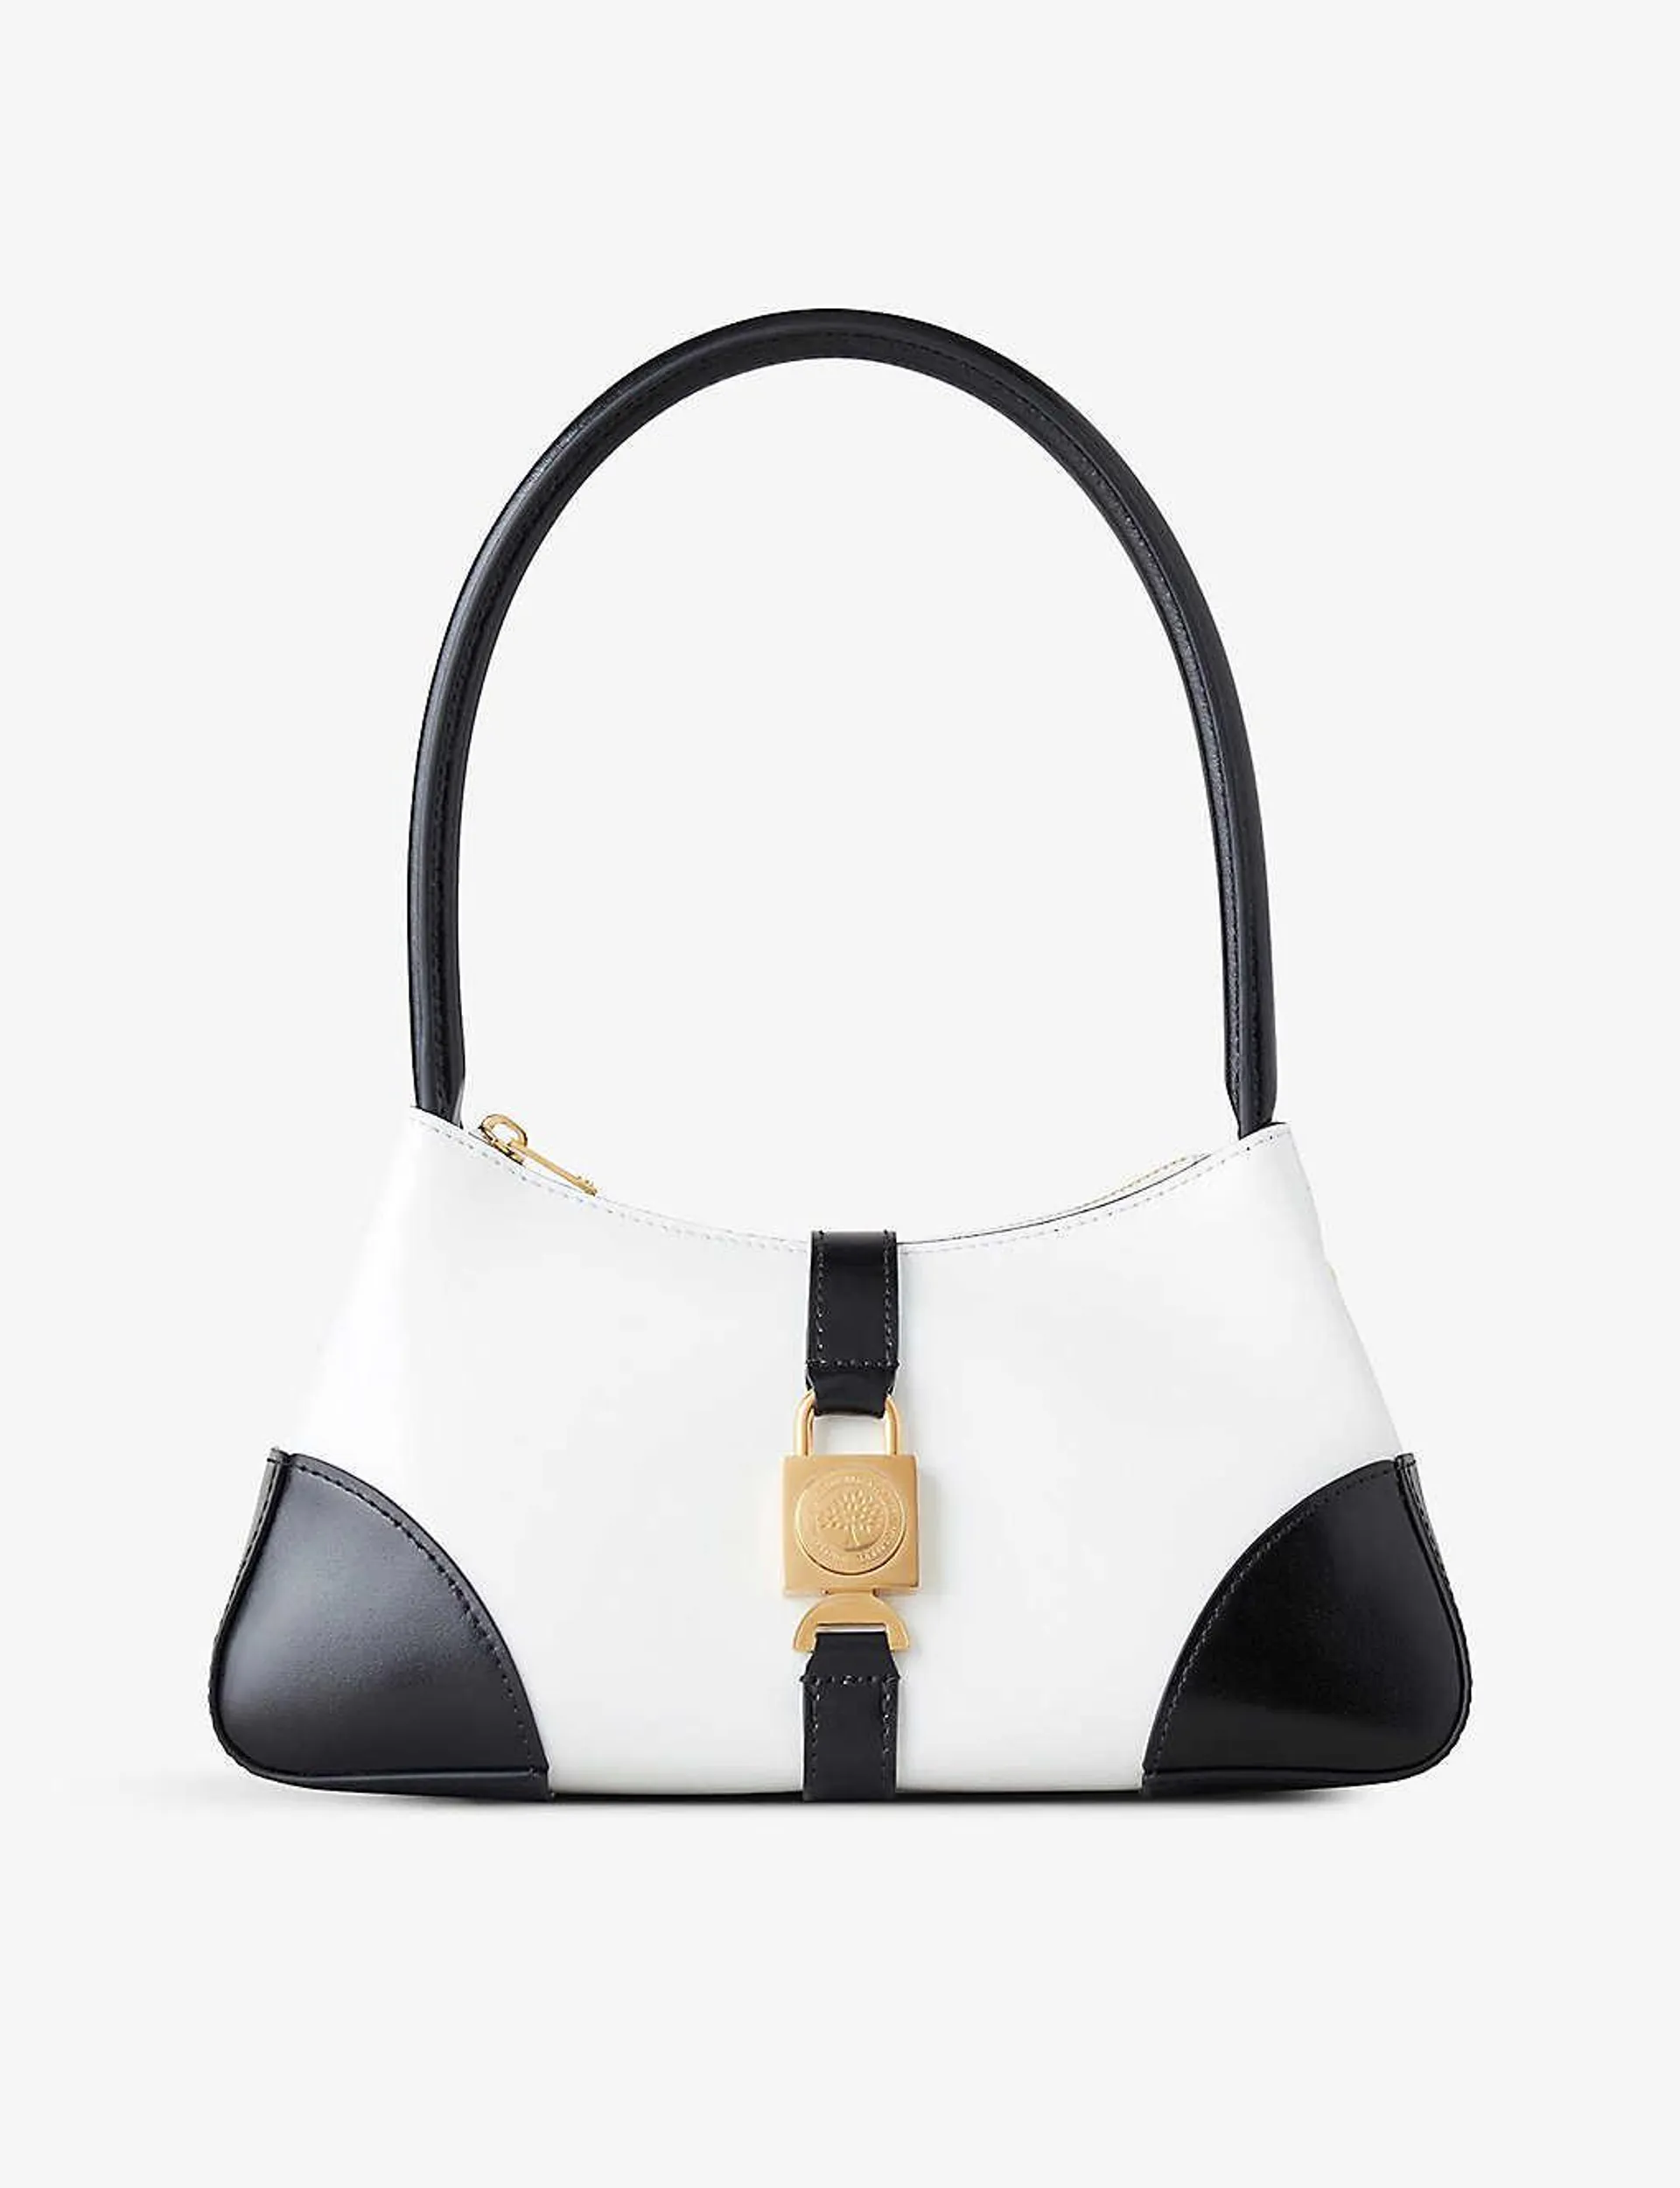 Mulberry x Axel Arigato leather top-handle bag